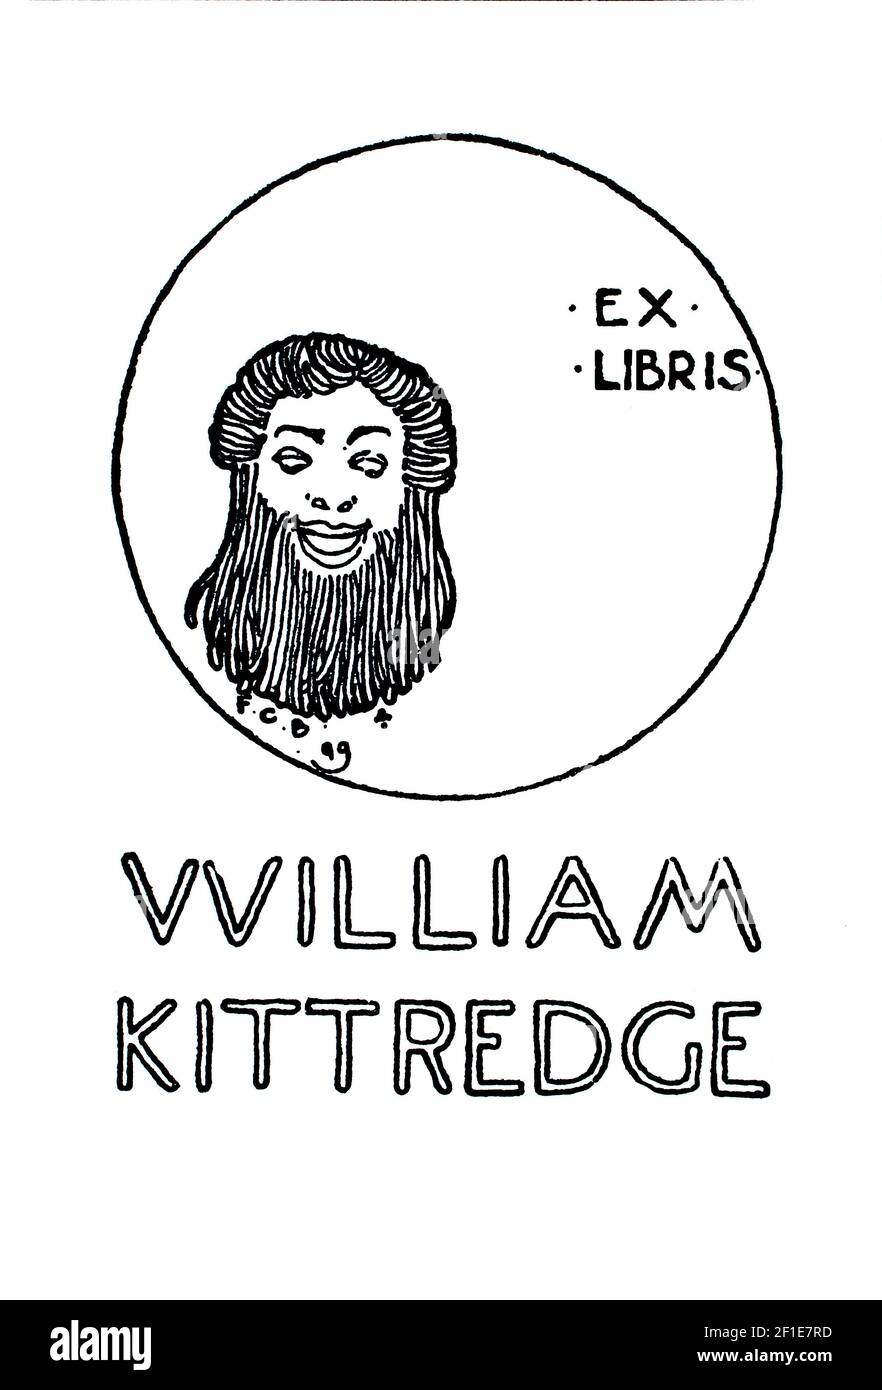 simple 1899 bookplate designed for William Kittredge by American artist, Frank Chouteau Brown of Boston Mass. Stock Photo